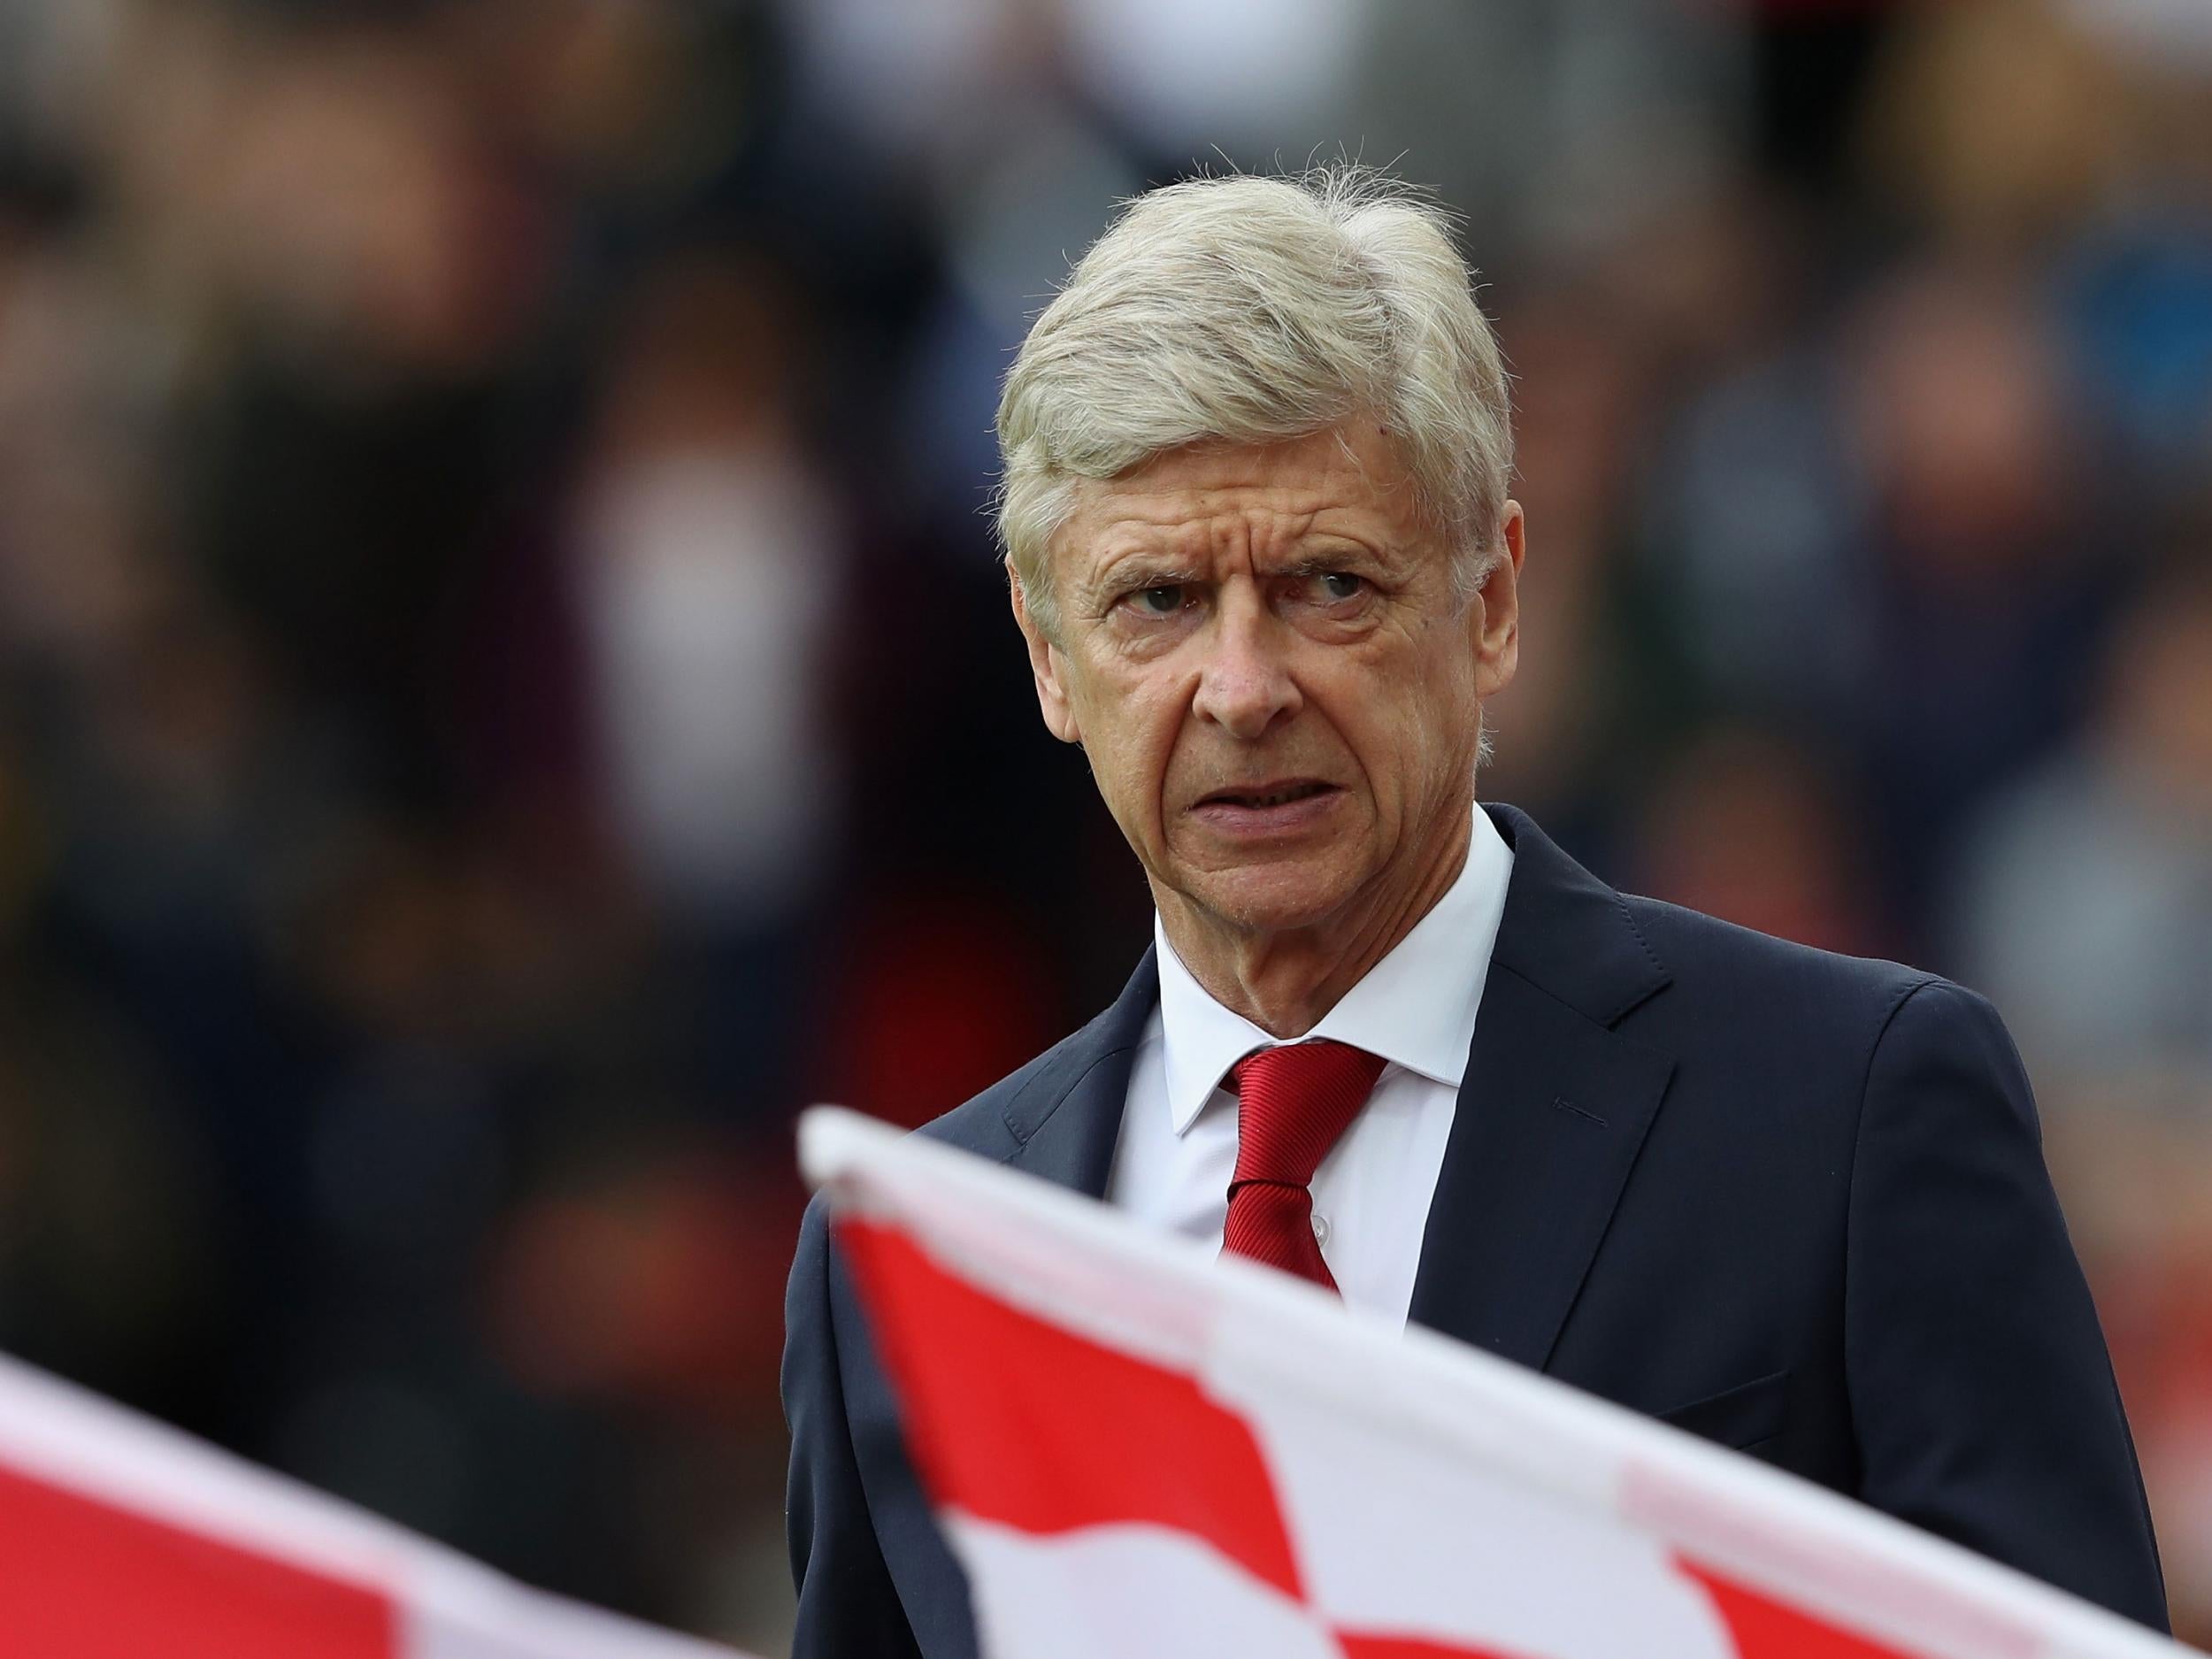 Arsene Wenger blamed both Arsenal's attack and defence for the Stoke defeat